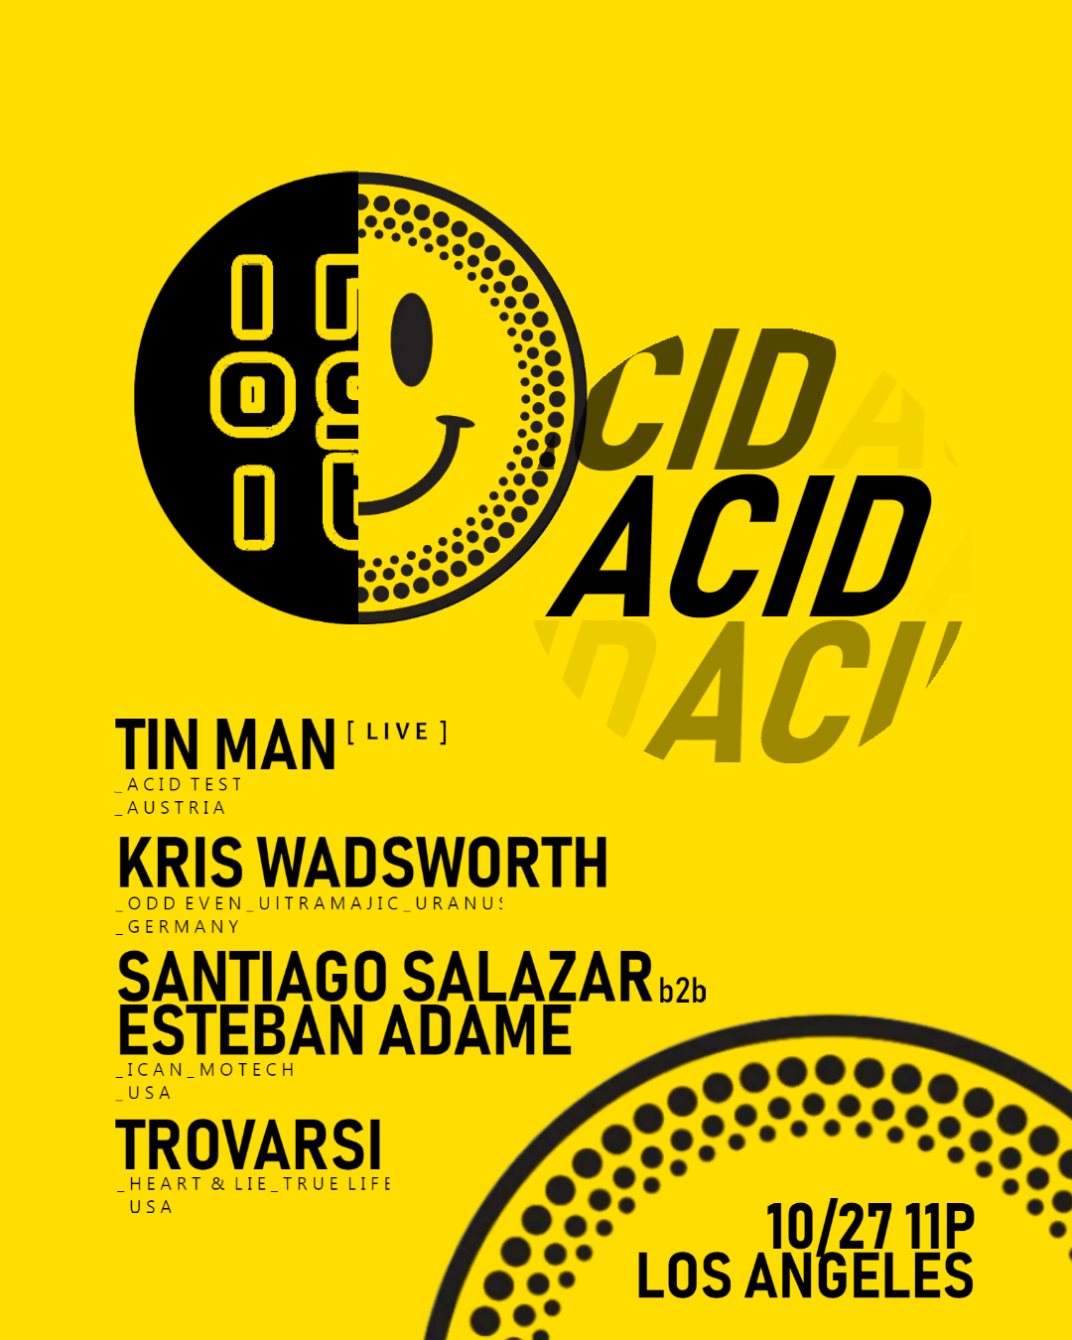 Incognito presents A Journey Through Acid with Tin Man, Kris Wadsworth plus more - Página trasera